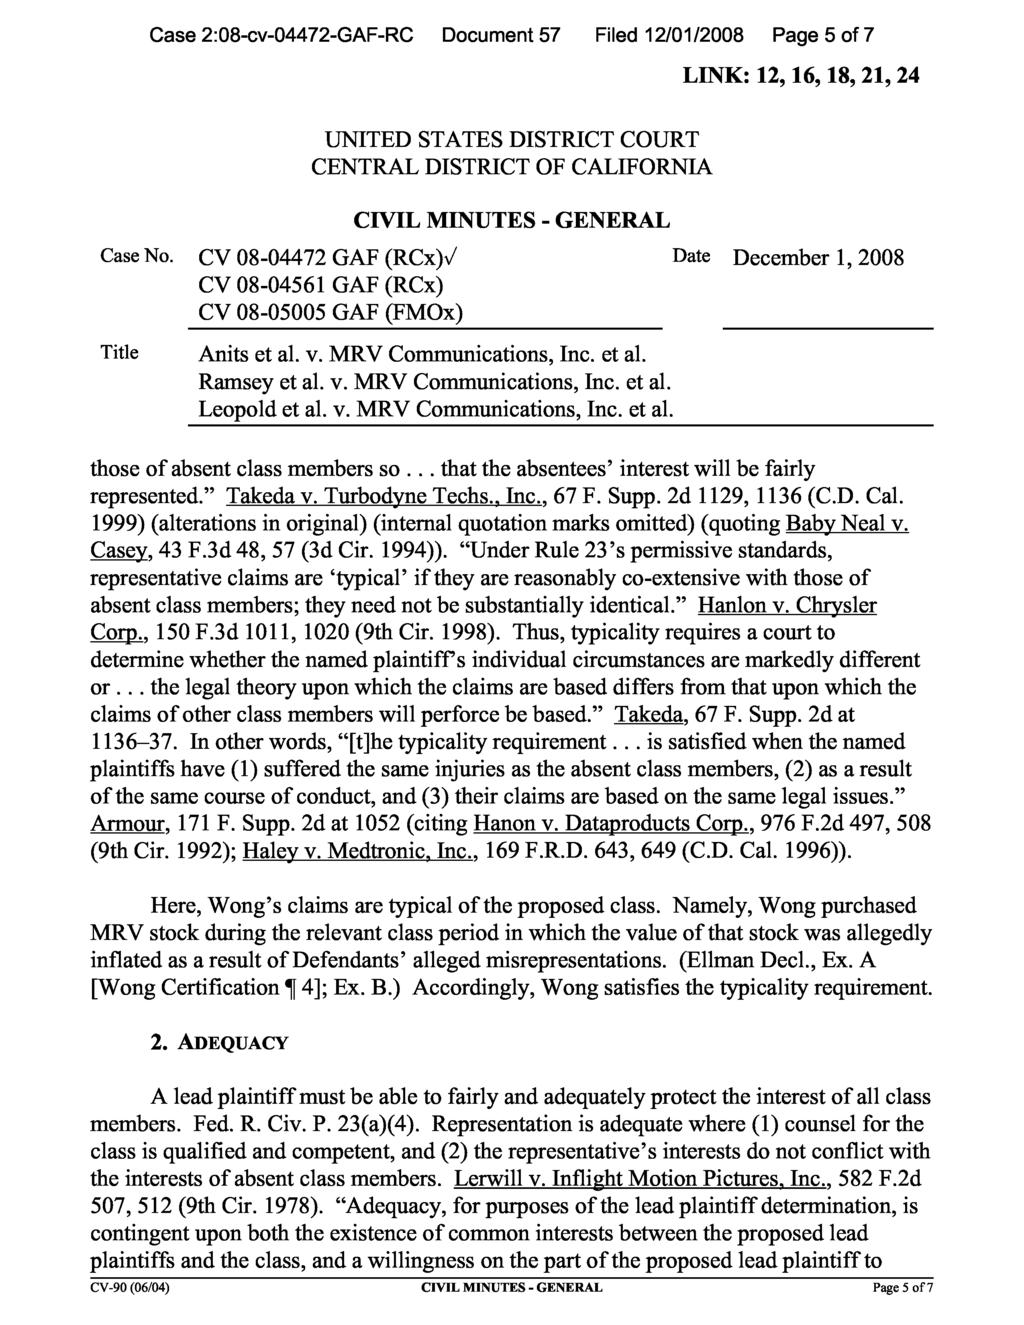 Case 2:08-cv-04472-GAF-RC Document 57 Filed 12/01/2008 Page 5 of 7 those of absent class members so... that the absentees interest will be fairly represented. Takeda v. Turbodyne Techs., Inc., 67 F.